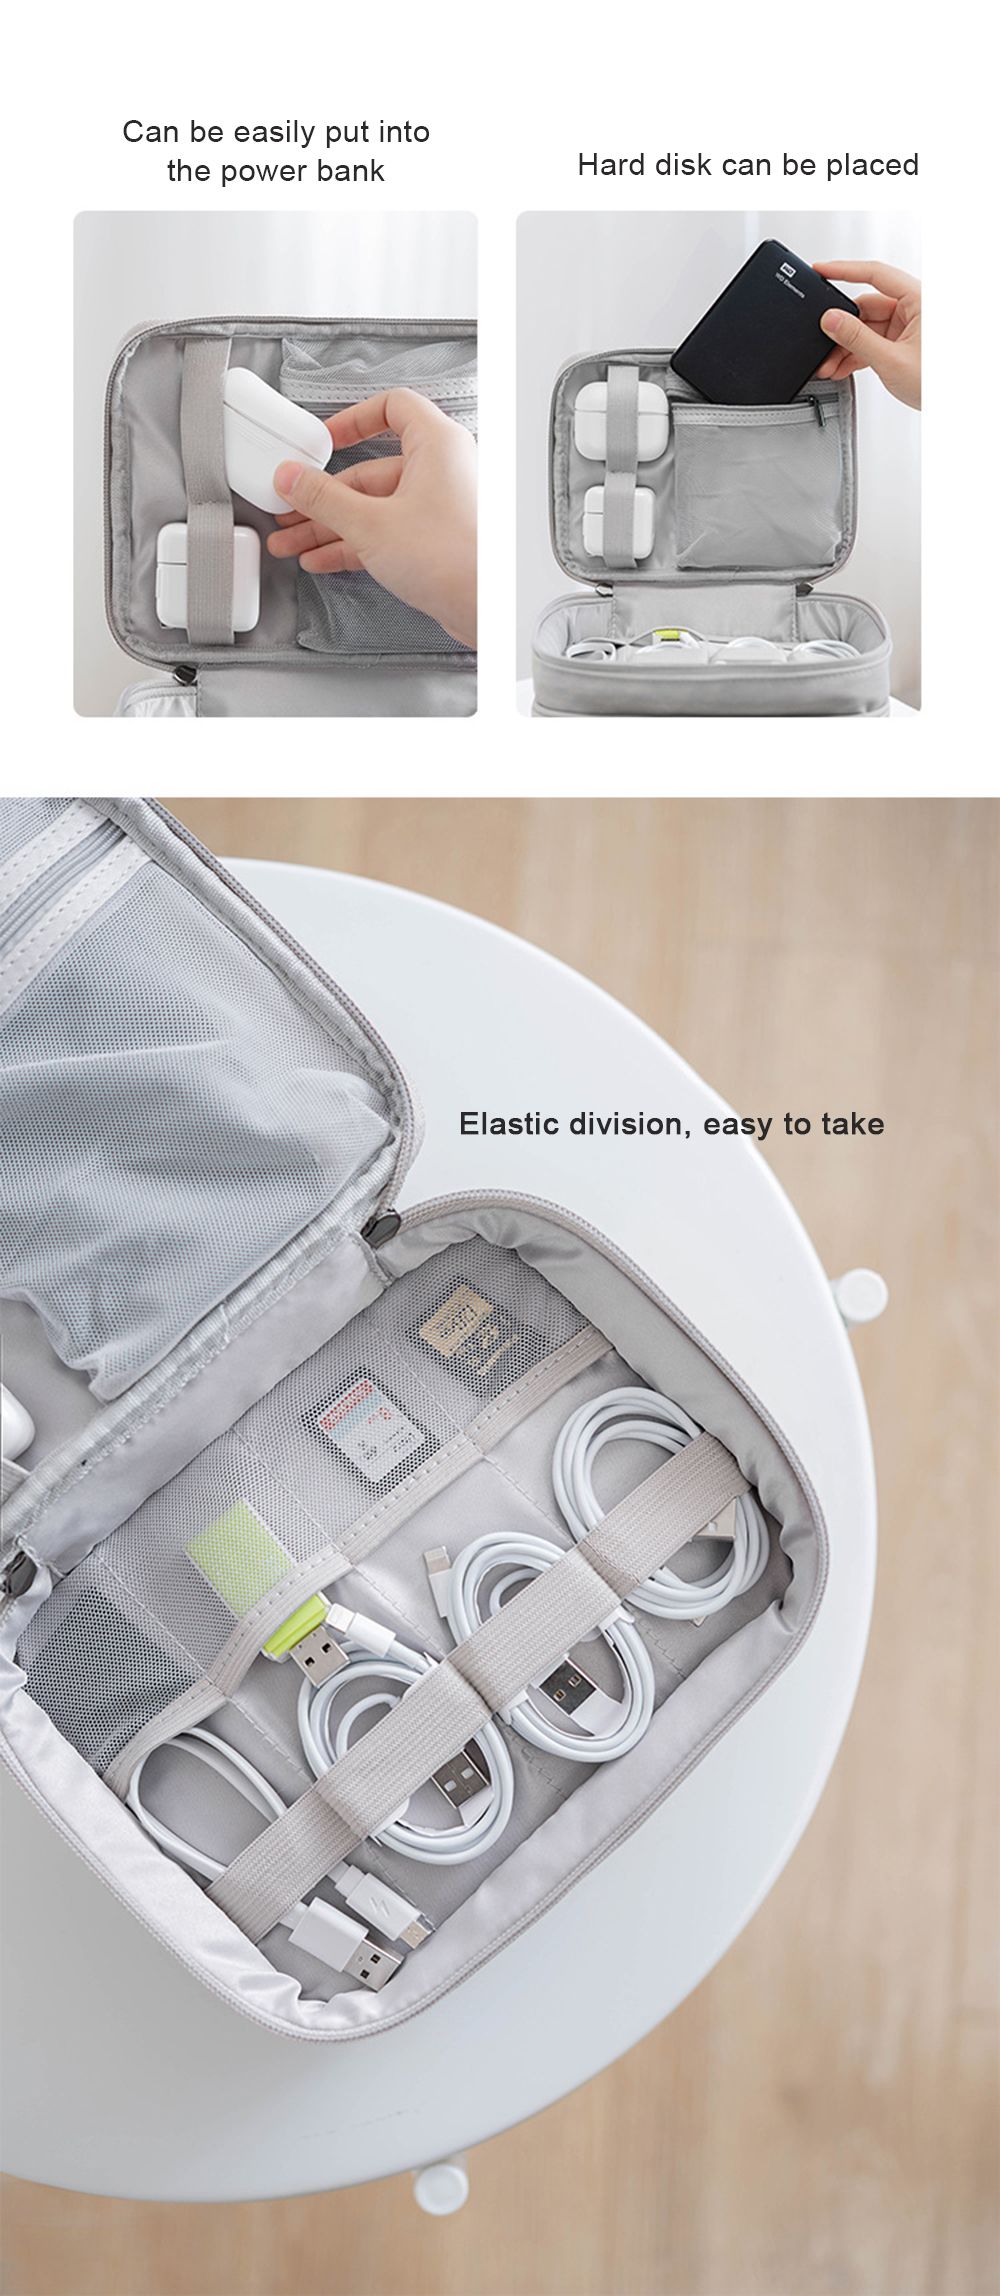 Kiss-The-Rain-Single-Double-Layer-Travel-Digital-Storage-Bag-Case-for-Data-Cable-Electronic-Mobile-P-1731232